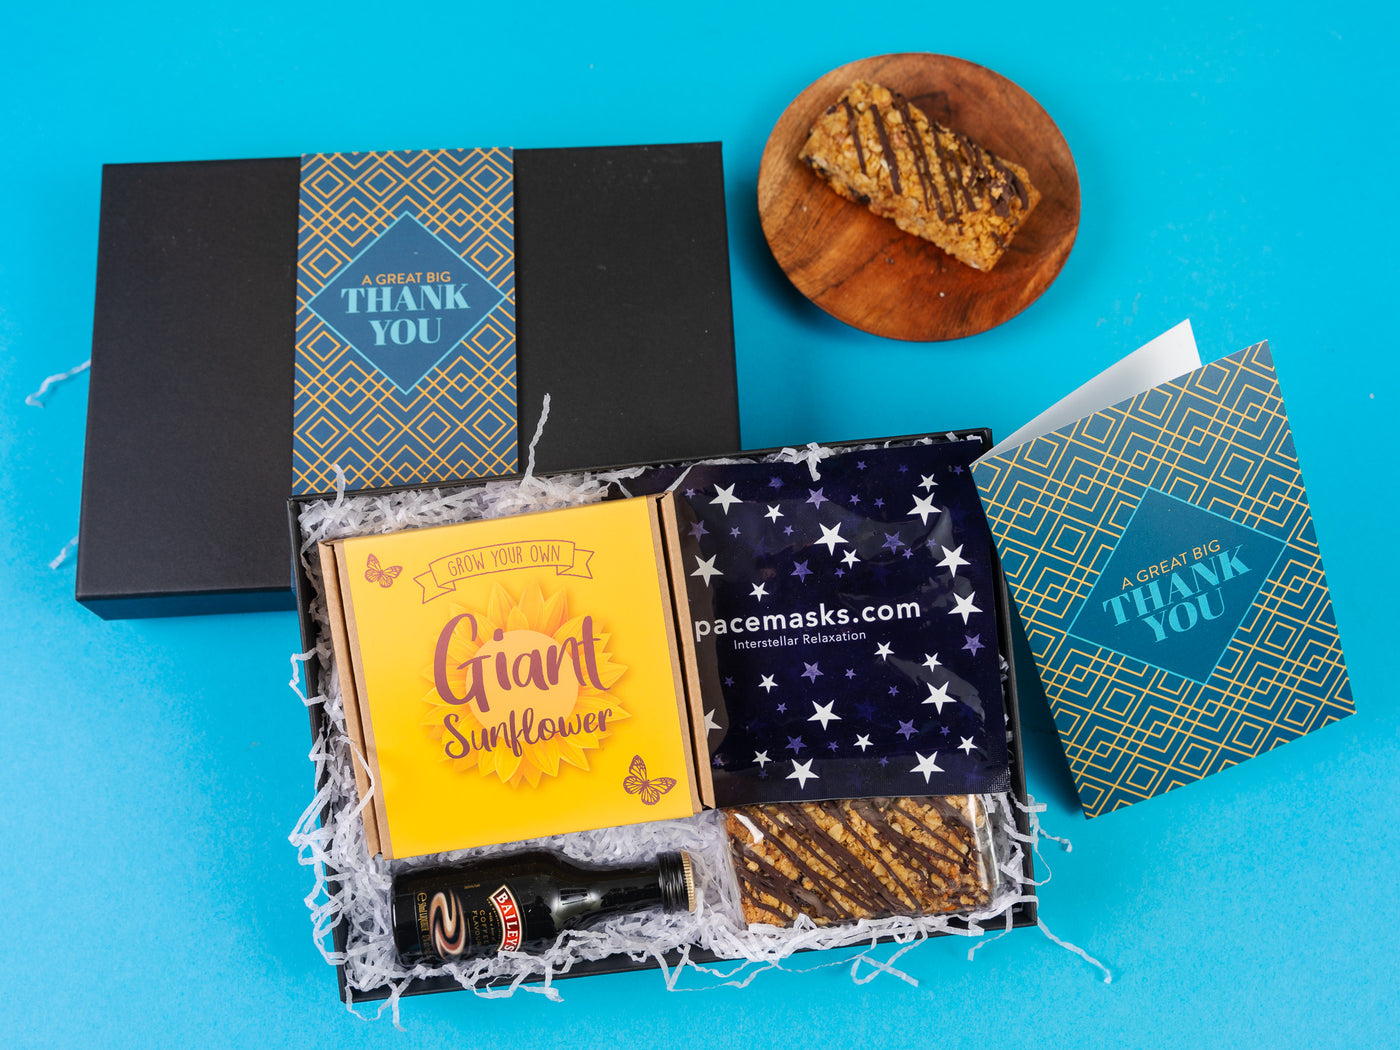 'Thank You' Wellbeing Gift